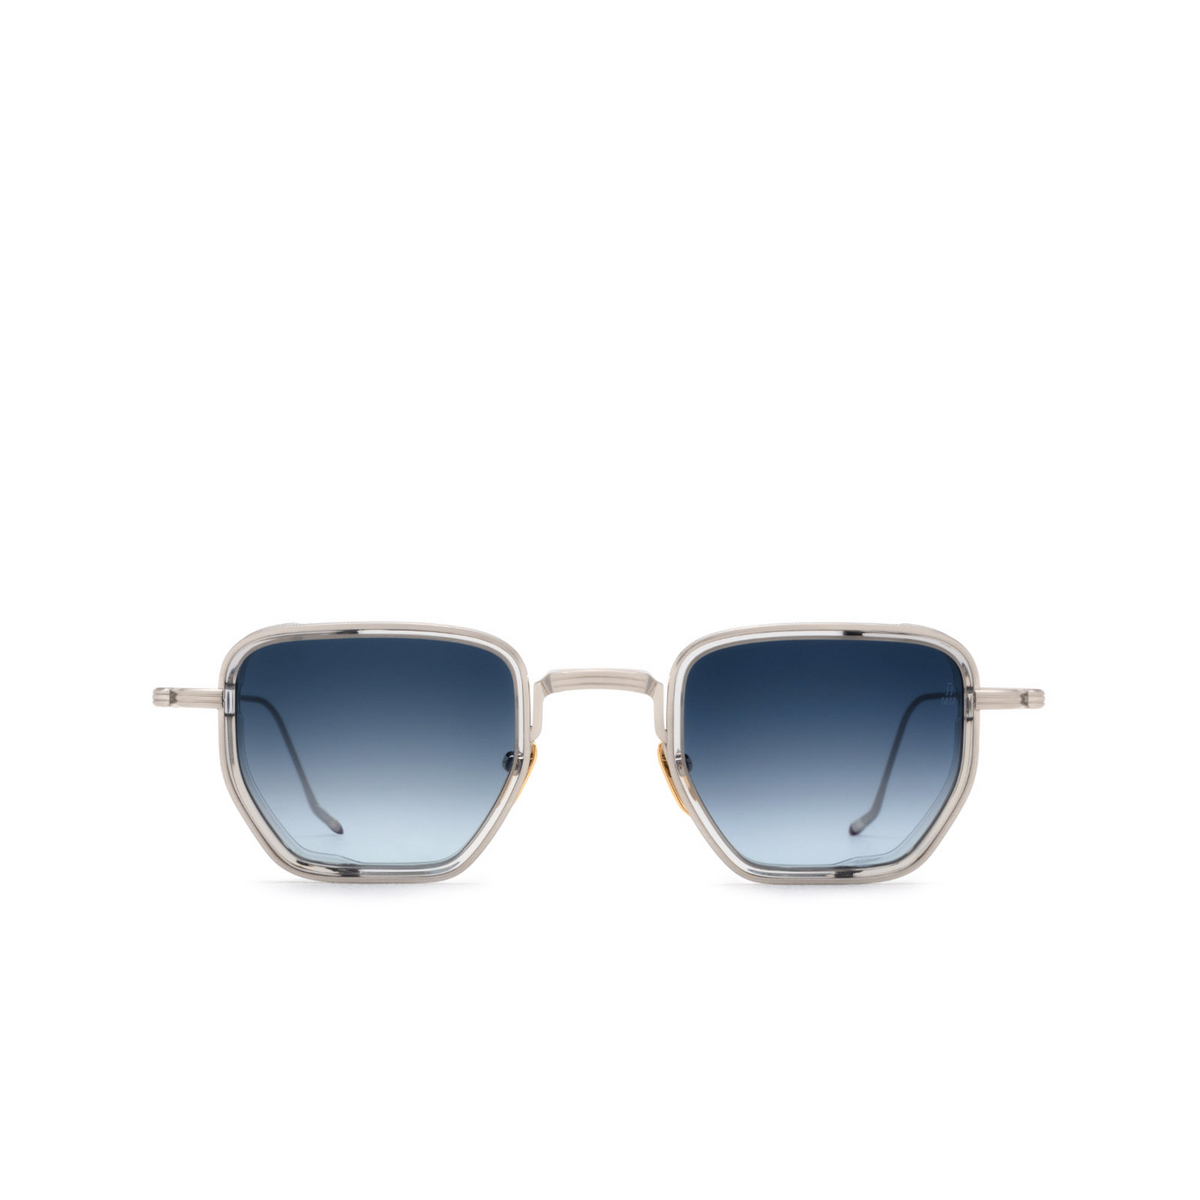 Jacques Marie Mage ATKINS Sunglasses FROST - front view